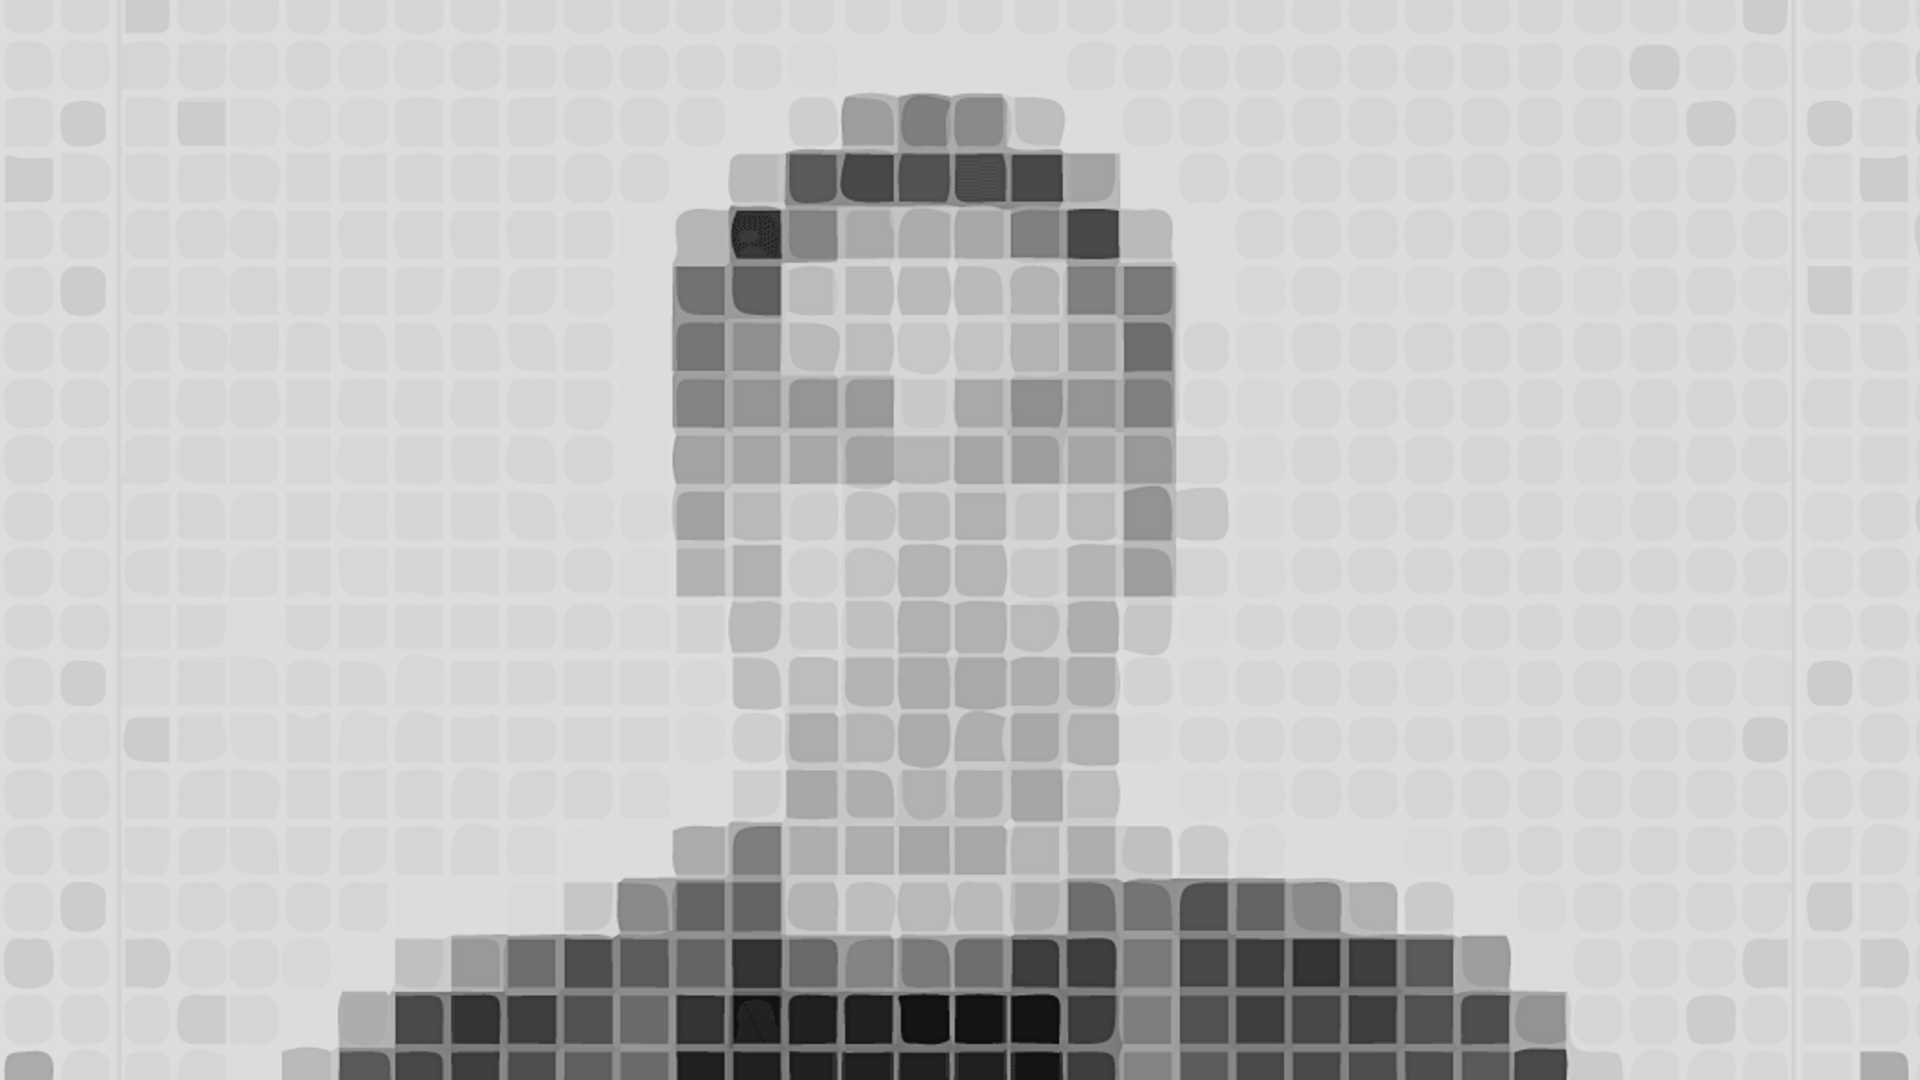 "facial-recognition-1" by EFF Photos, used under CC BY 2.0 / Cropped, desaturated and resampled from original